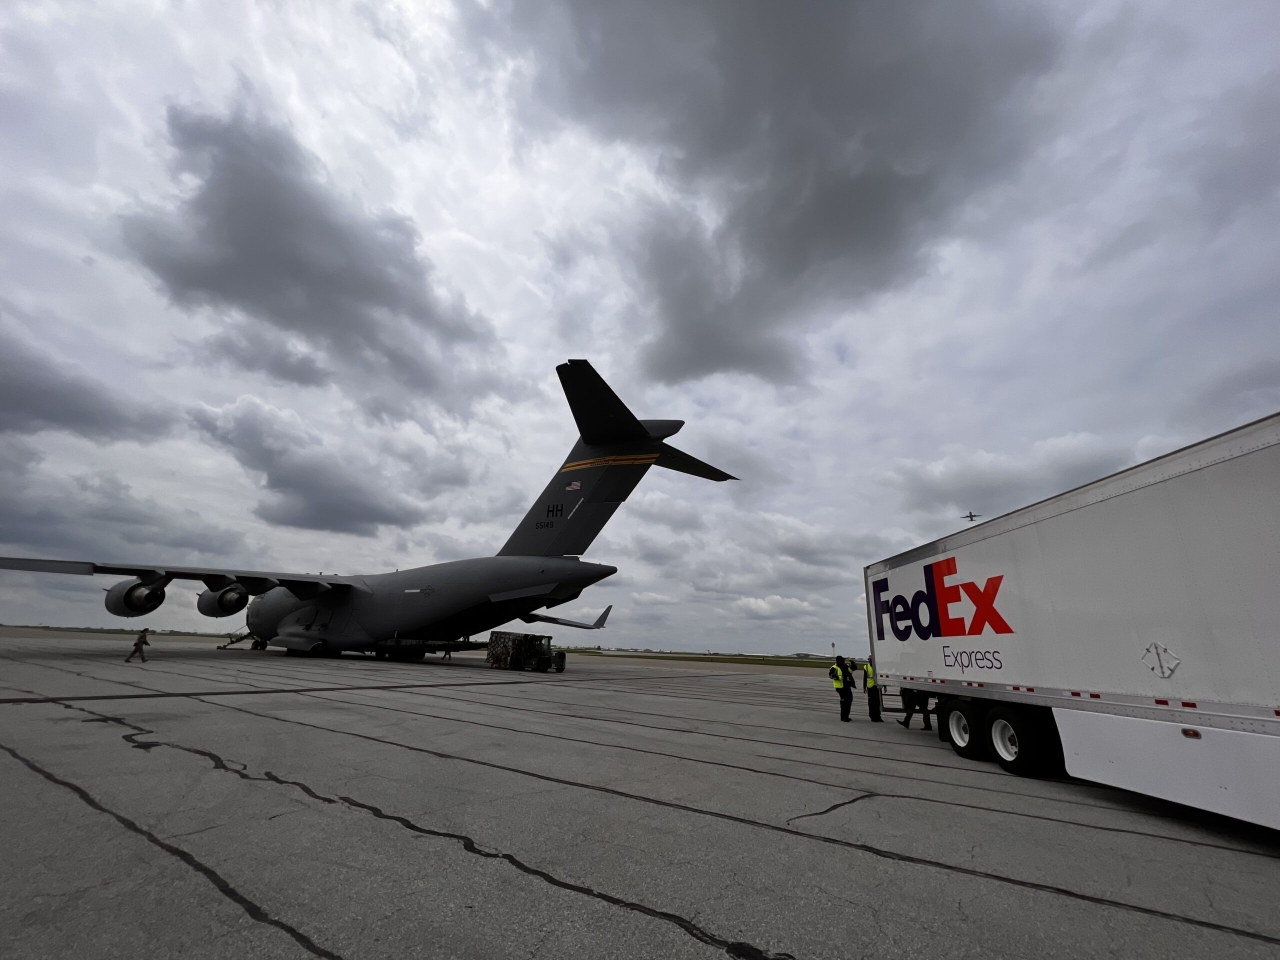 Military plane and FedEx truck